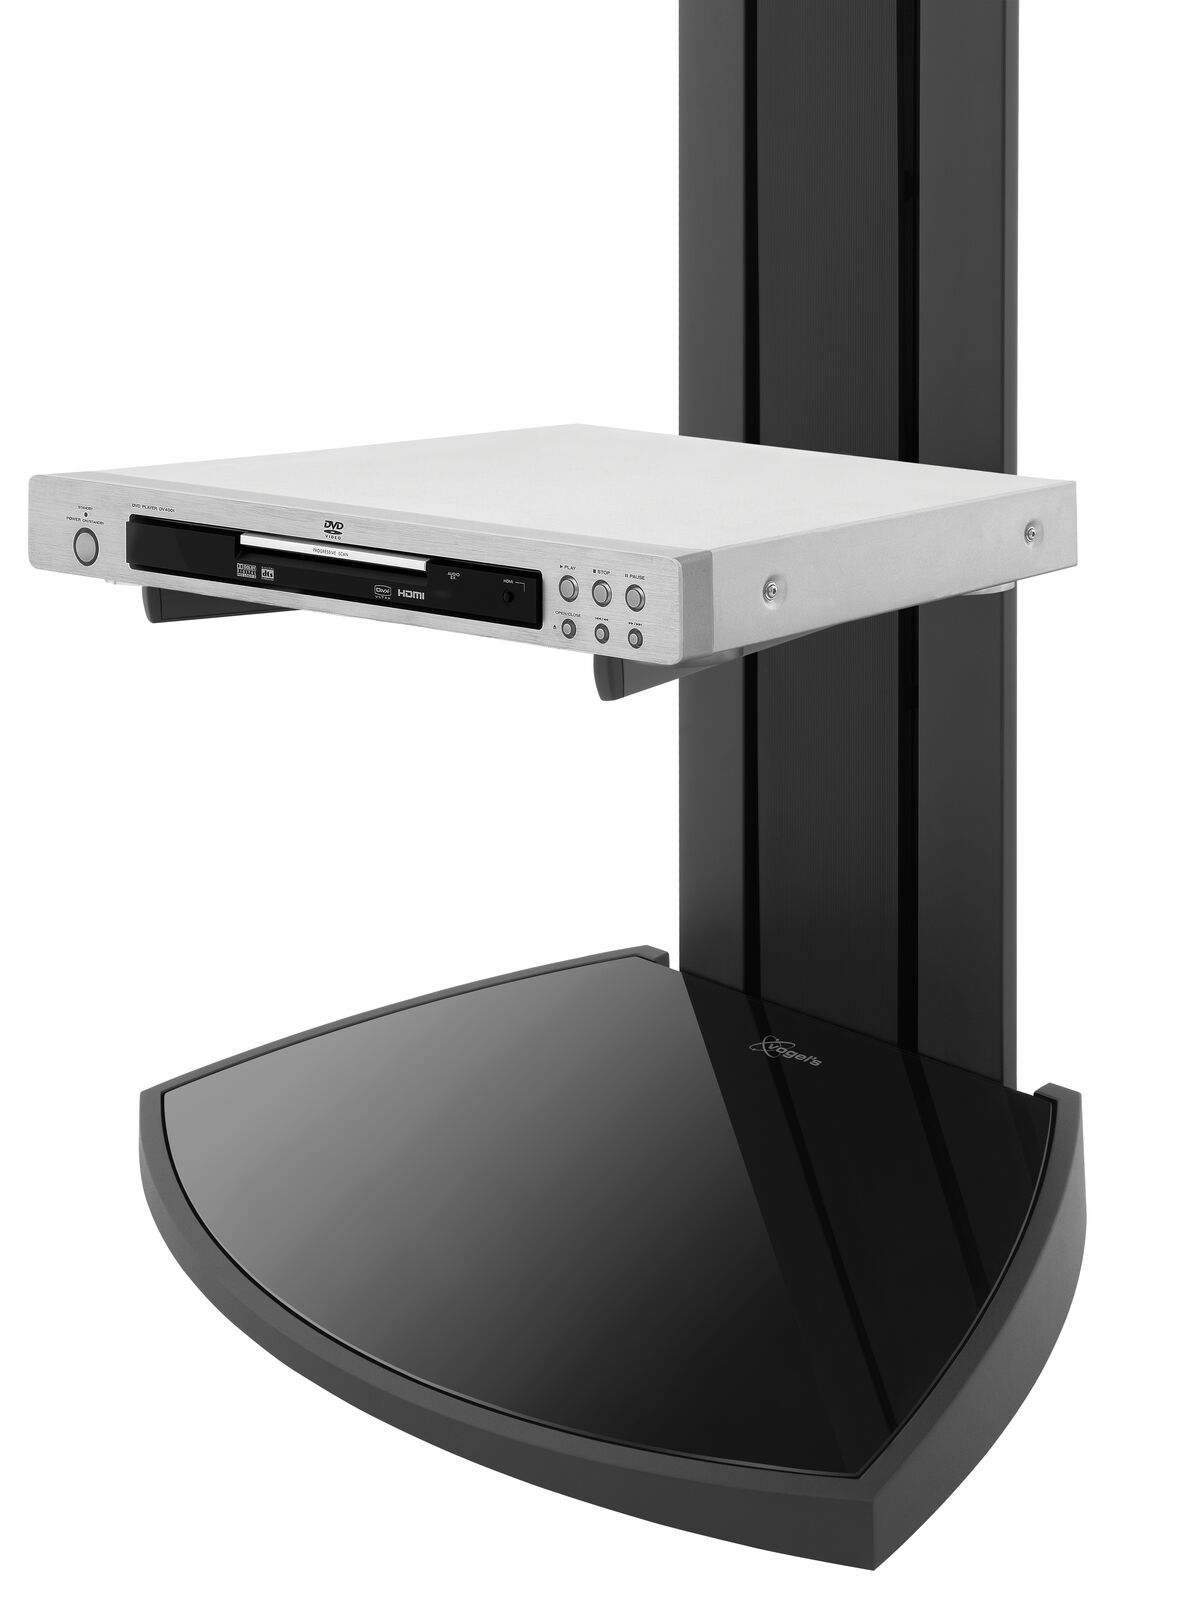 Vogel's EFF 8340 TV Floor Stand (black) - Suitable for 40 up to 65 inch TVs up to Detail